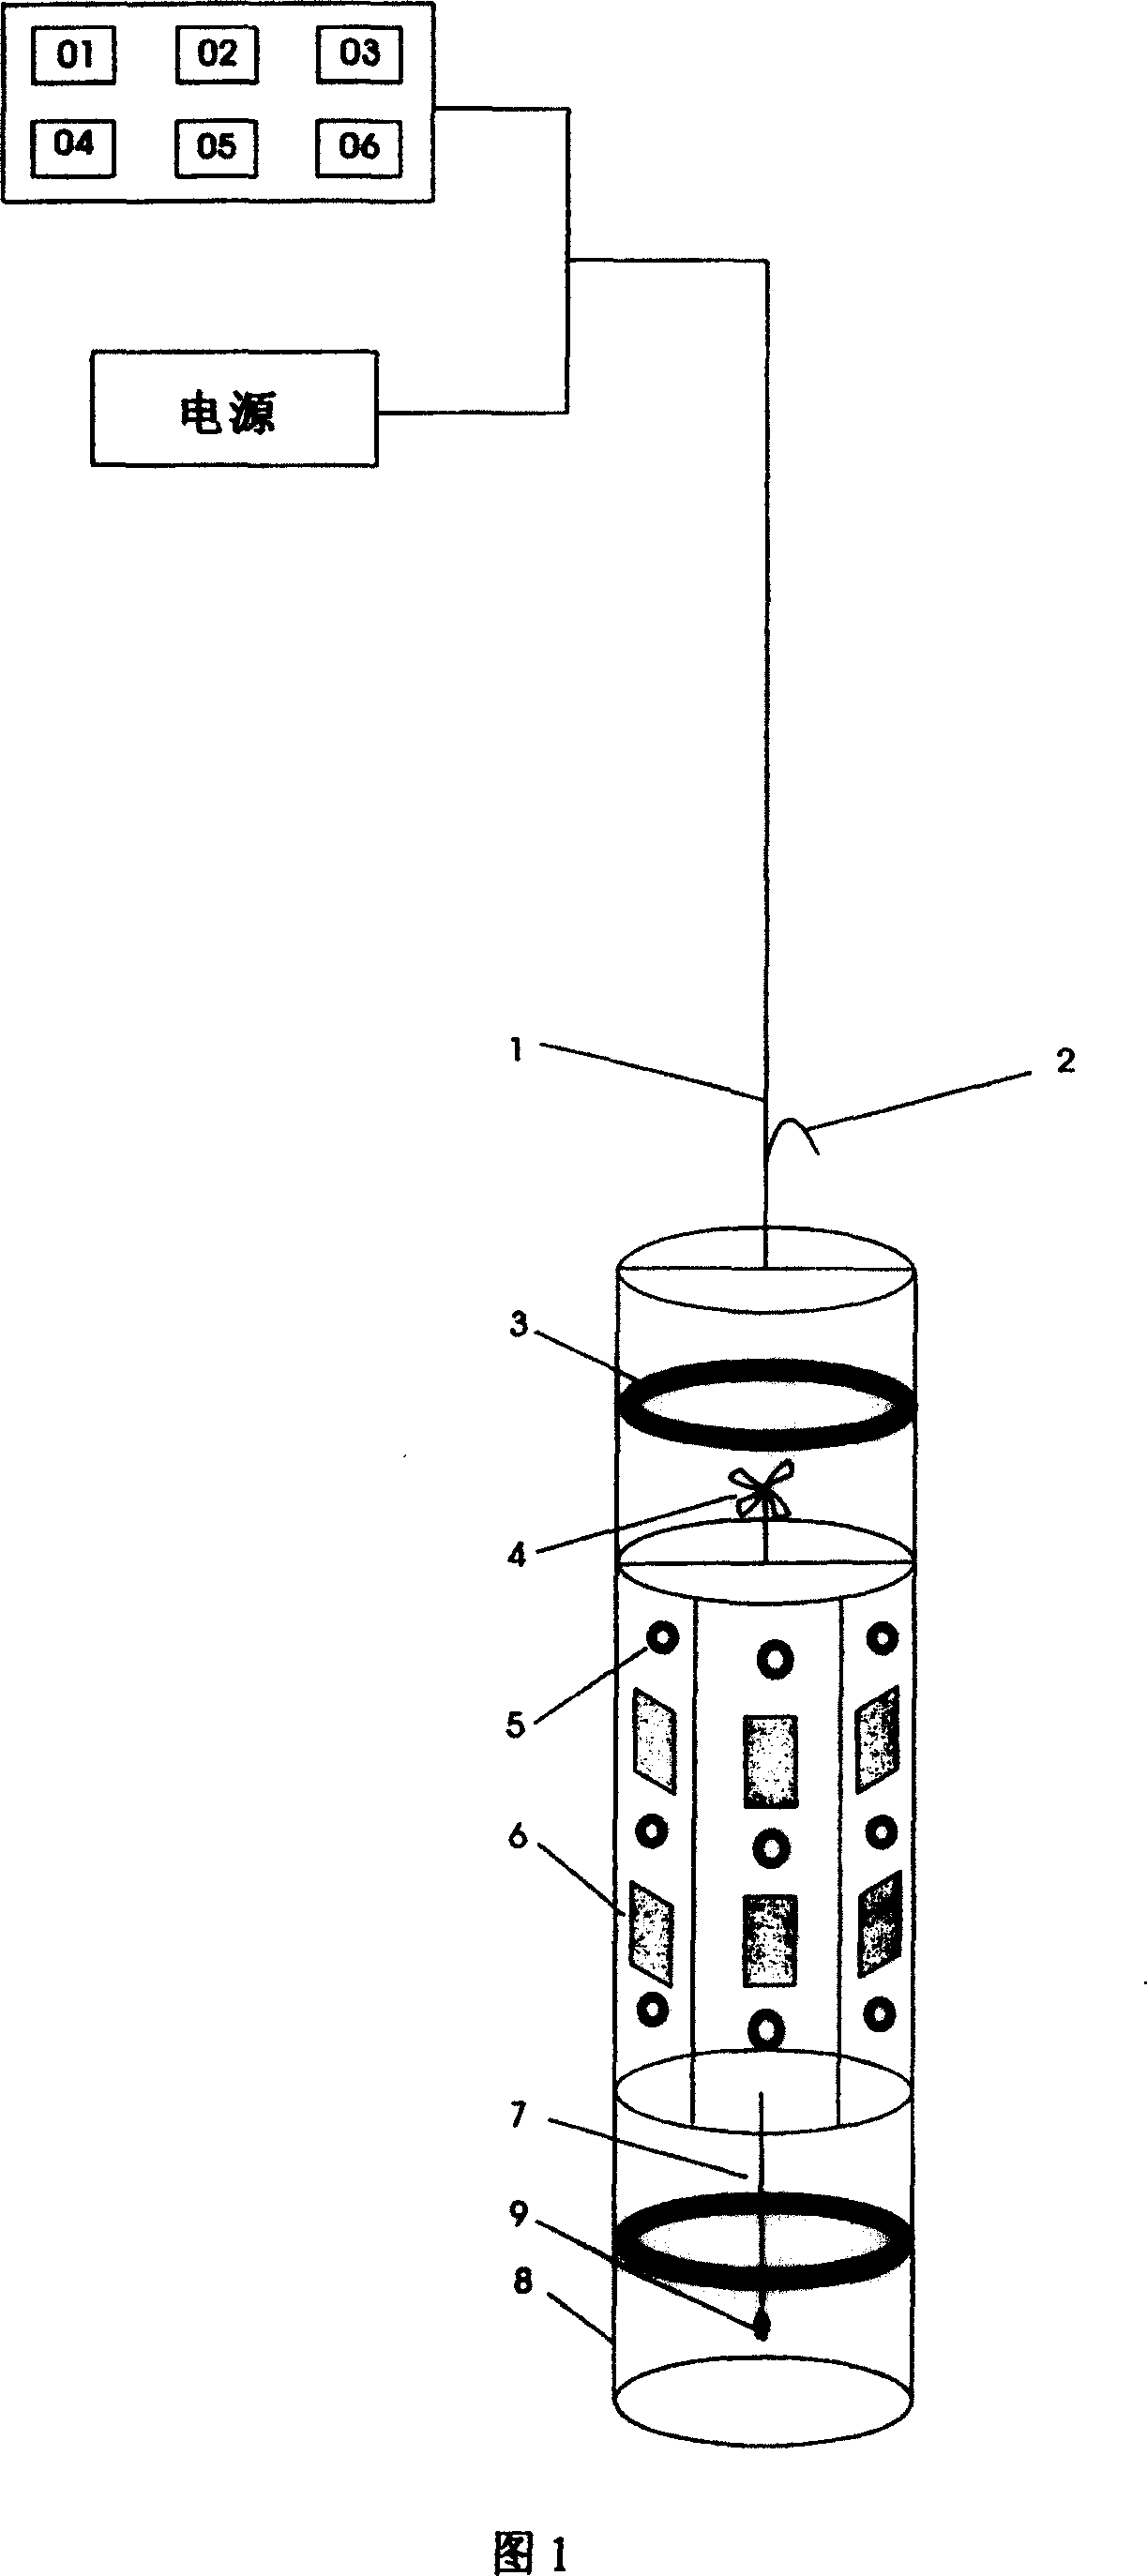 Method and apparatus for producing thick oil based on sound, light and electricity combination function